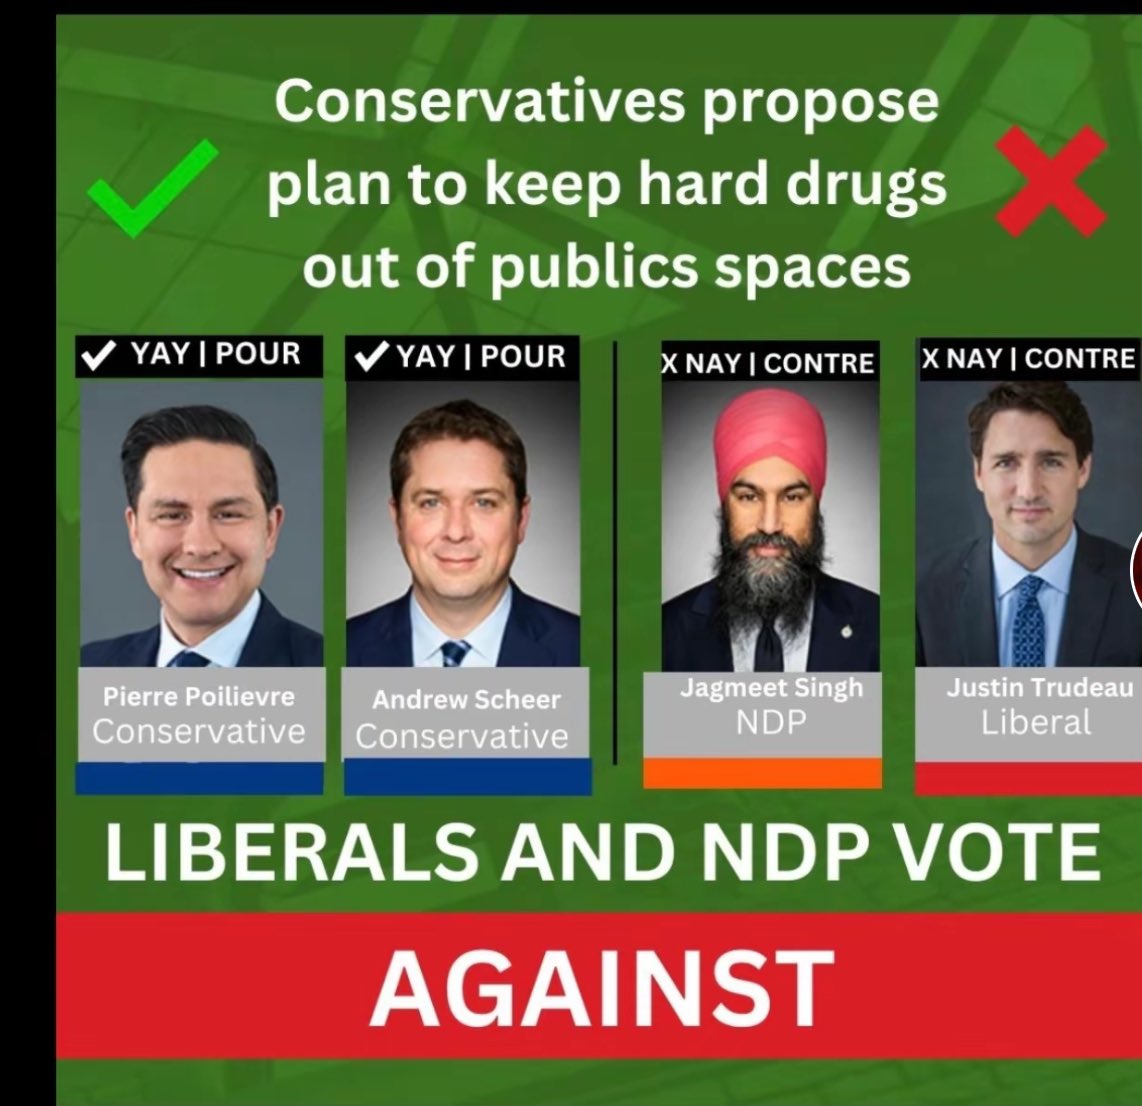 @theJagmeetSingh Why did you vote against this ⬇️⬇️⬇️ Do you ever think for yourself?? Is that Pension really worth your soul?? #SellOutSingh